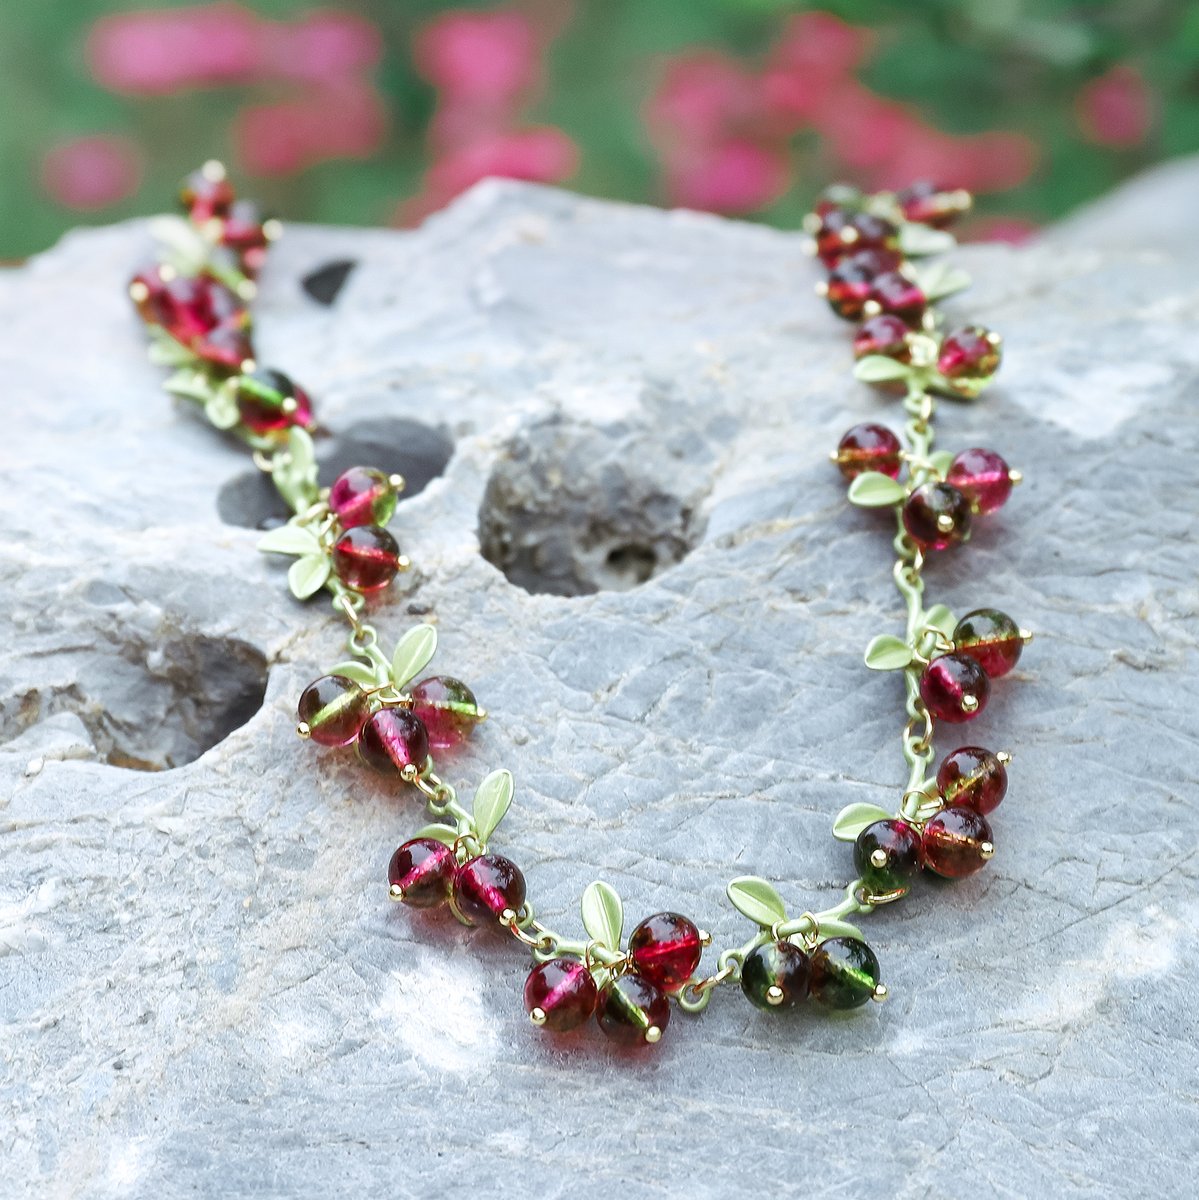 This Cranberry Necklace is crafted in luxurious agate for an elegant, timeless look. 

Shop in the link🔗selenichast.com/collections/be…
#selenichast #selenichastjewel #cottagecore #aestheticjewelry #uniquegifts #retrojewelry #chokers #cranberrynecklace #jewelrycollection #jewelryinspo